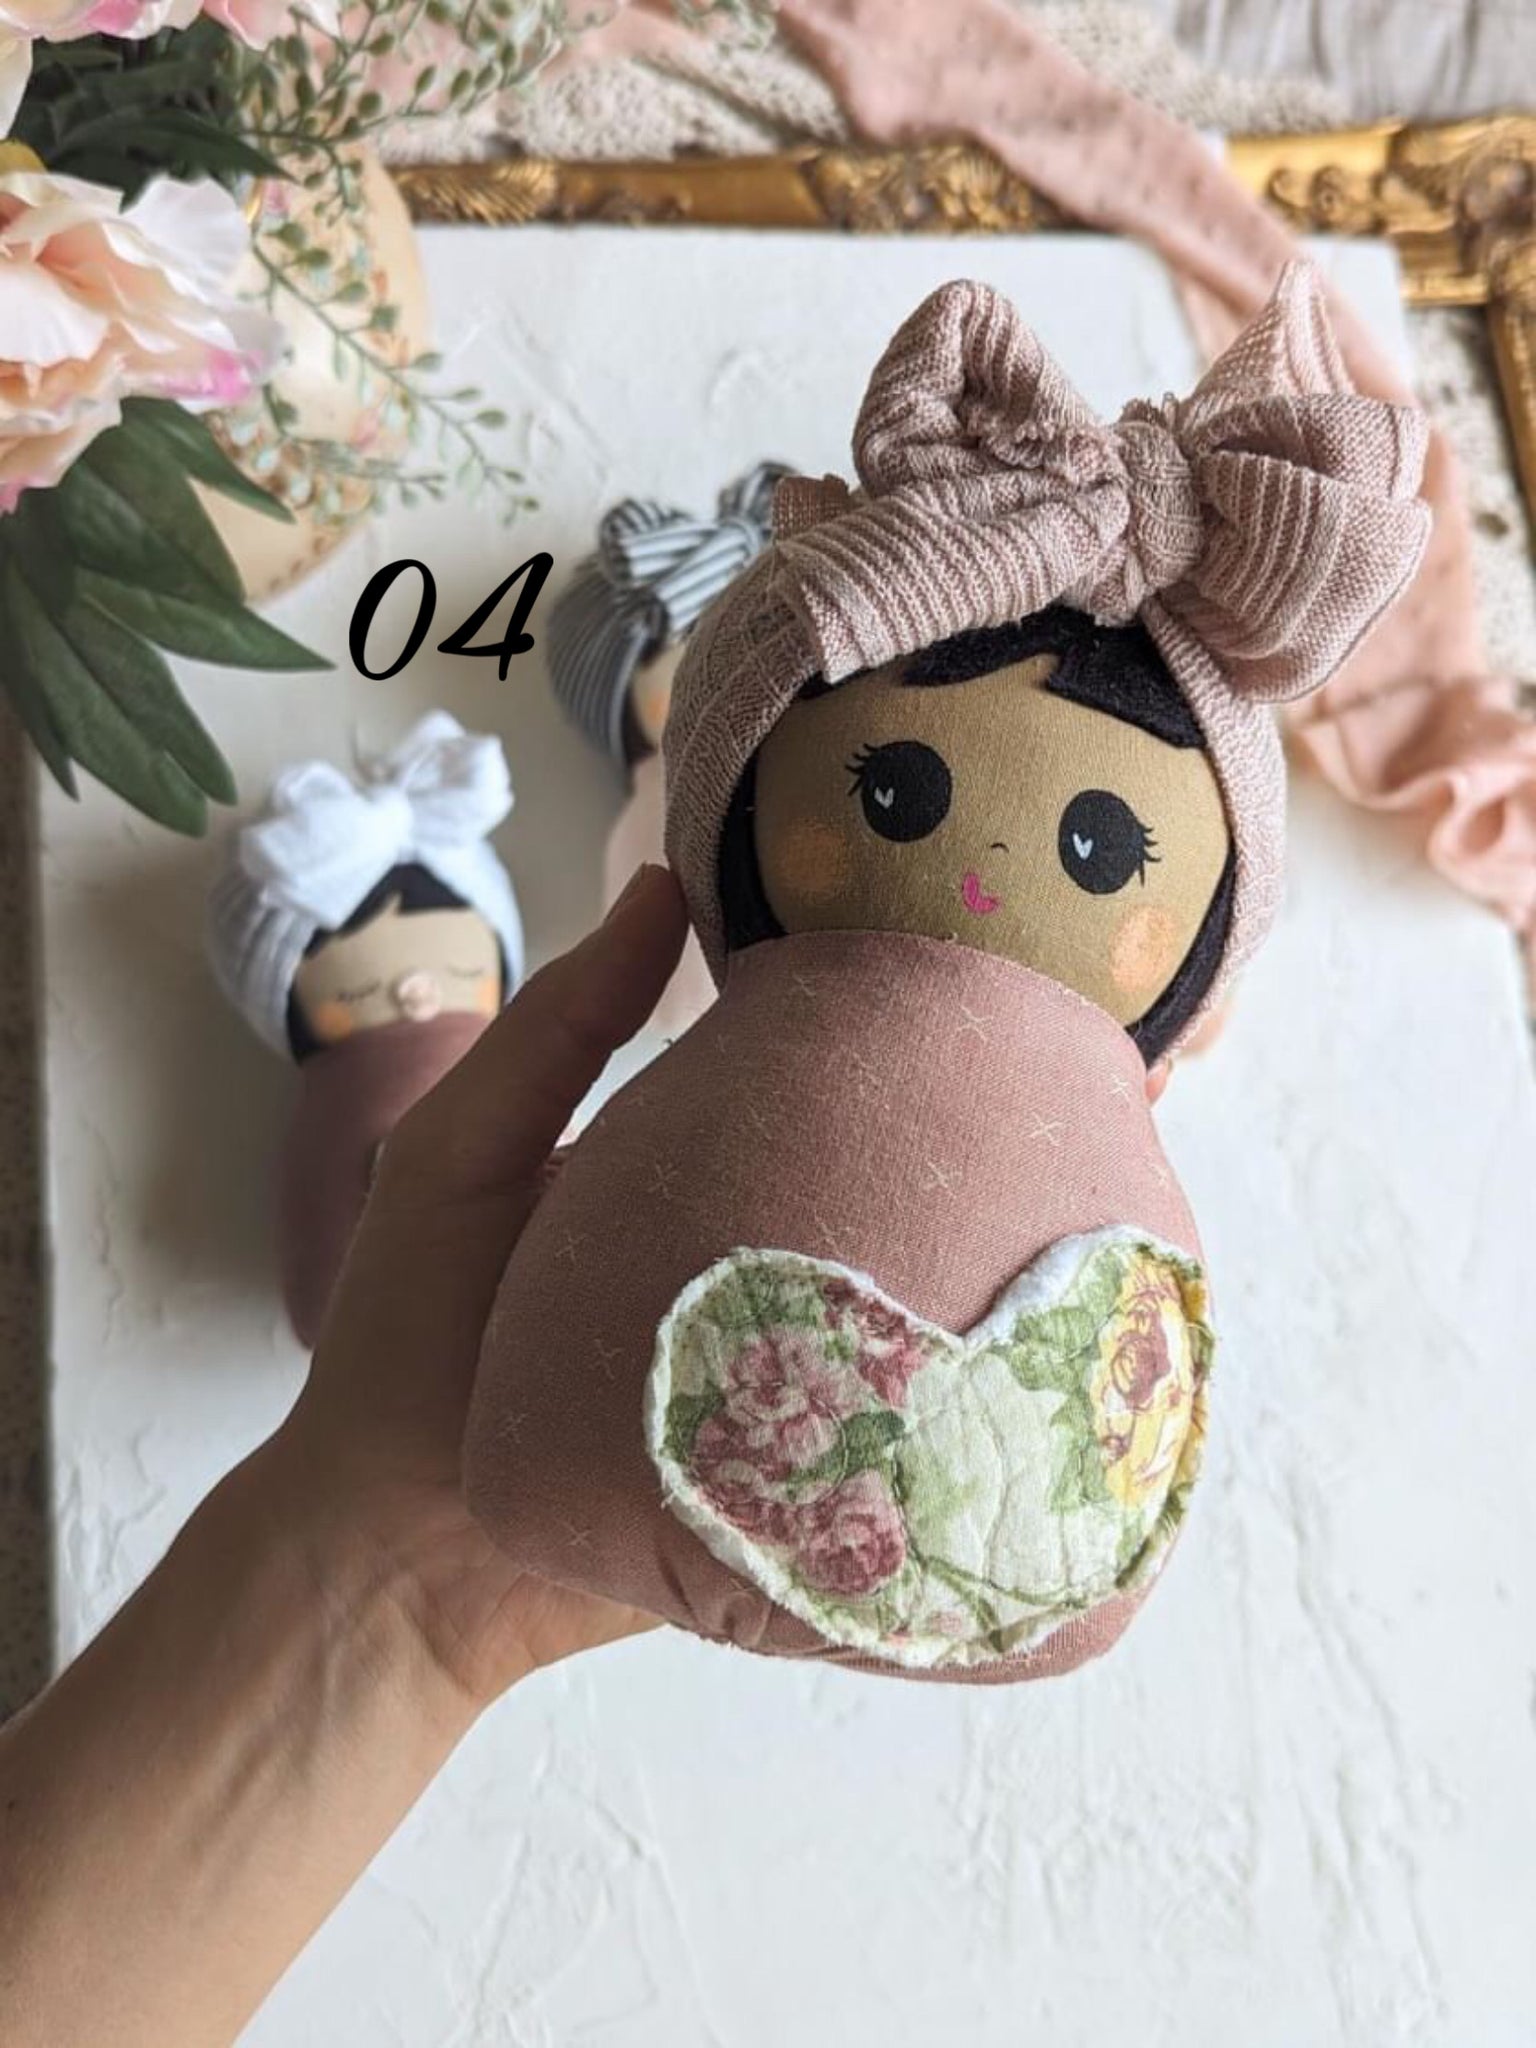 04 Swaddle baby, handmade doll, Valentines collection